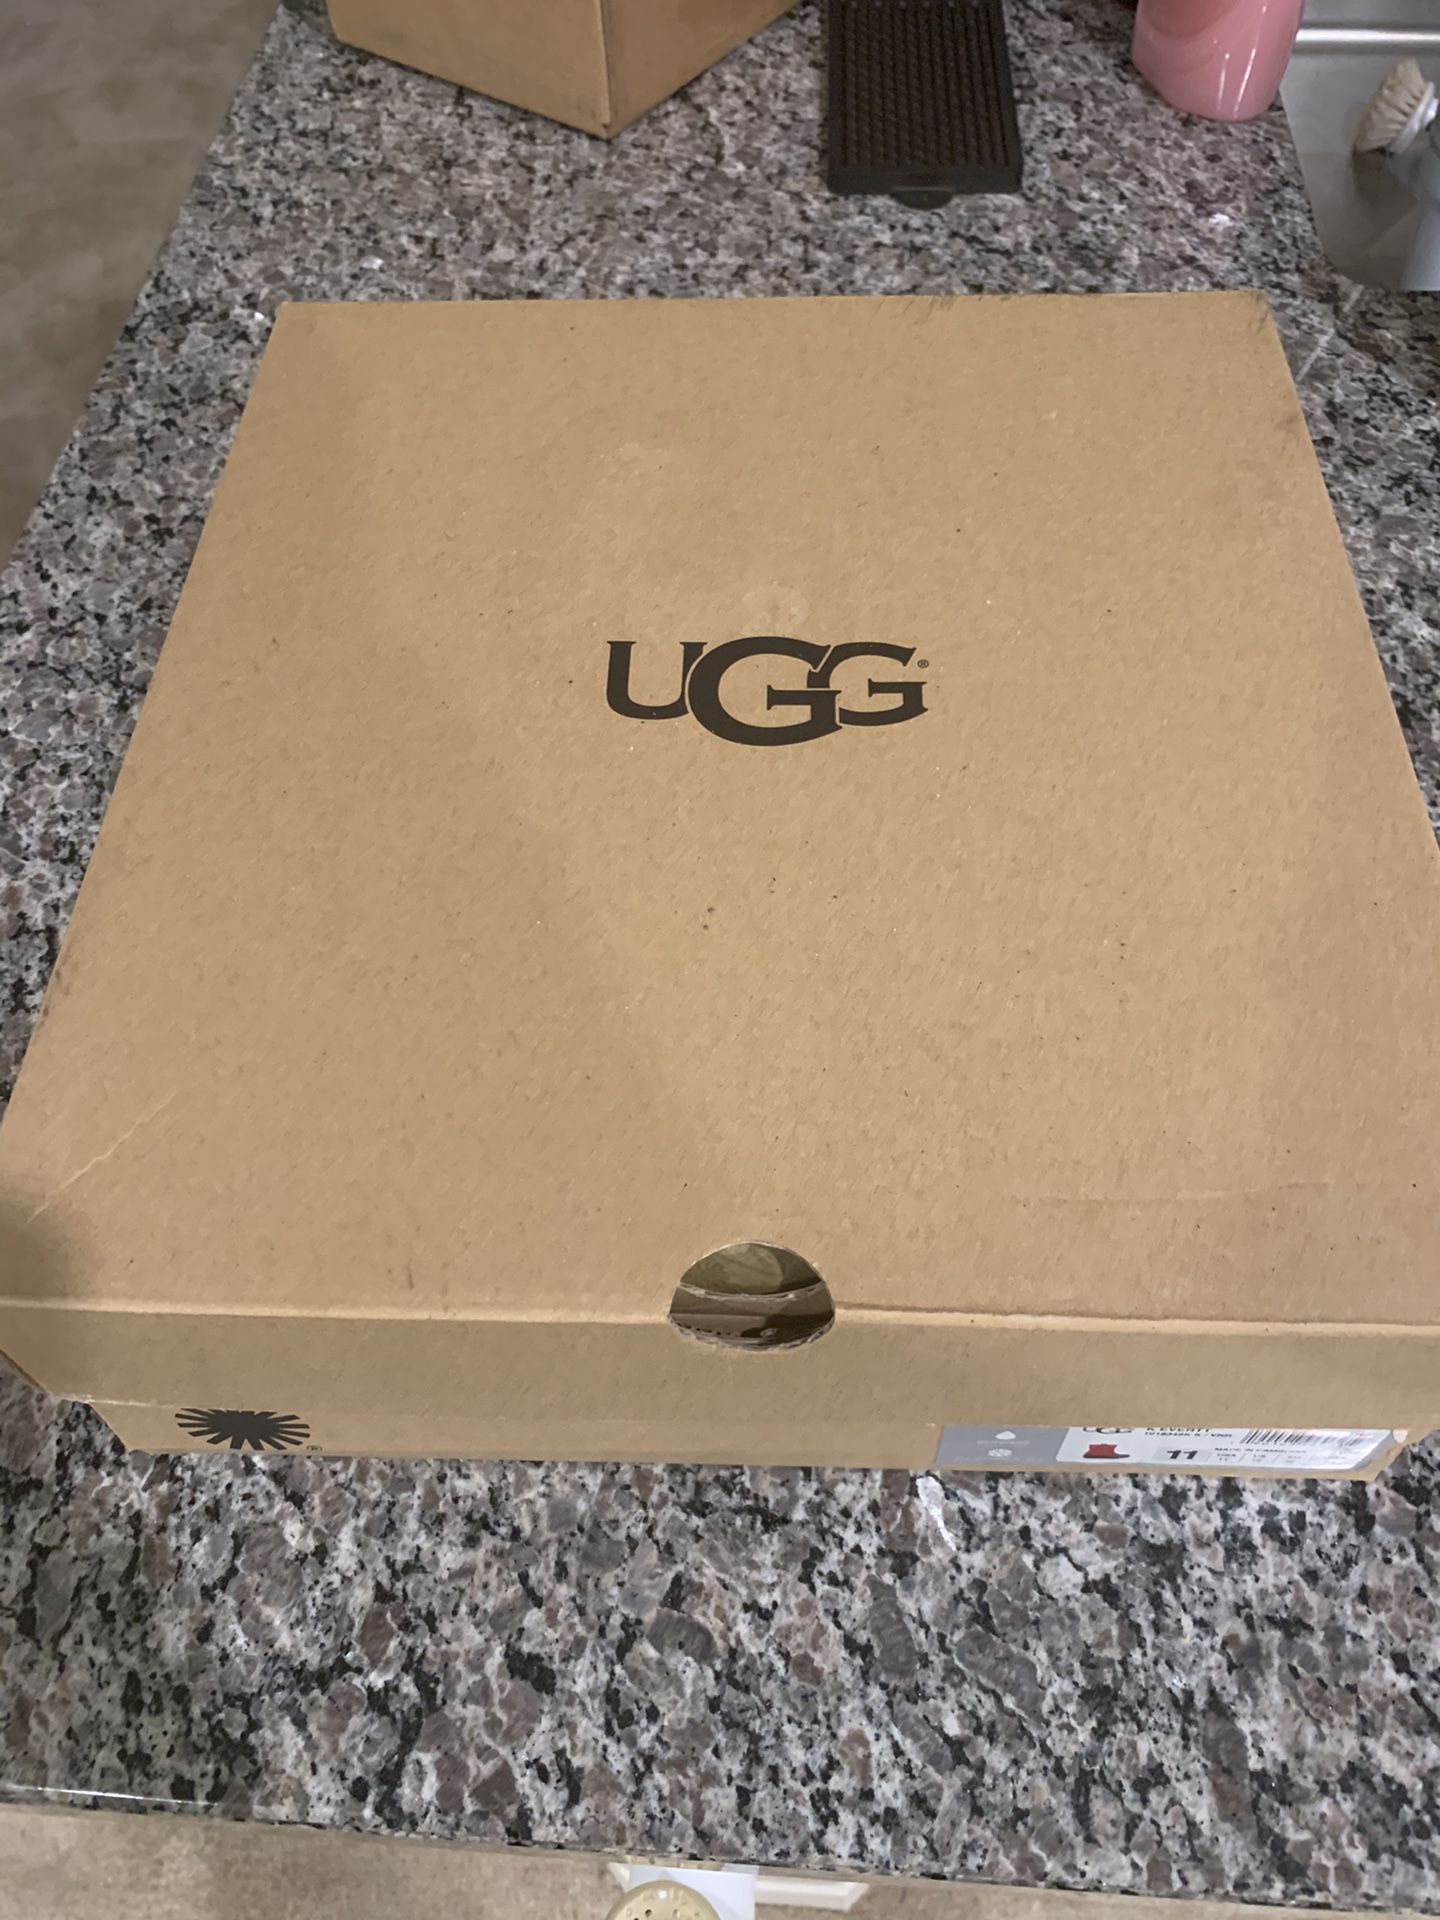 Ugg Kids Size 11 Snow Boots